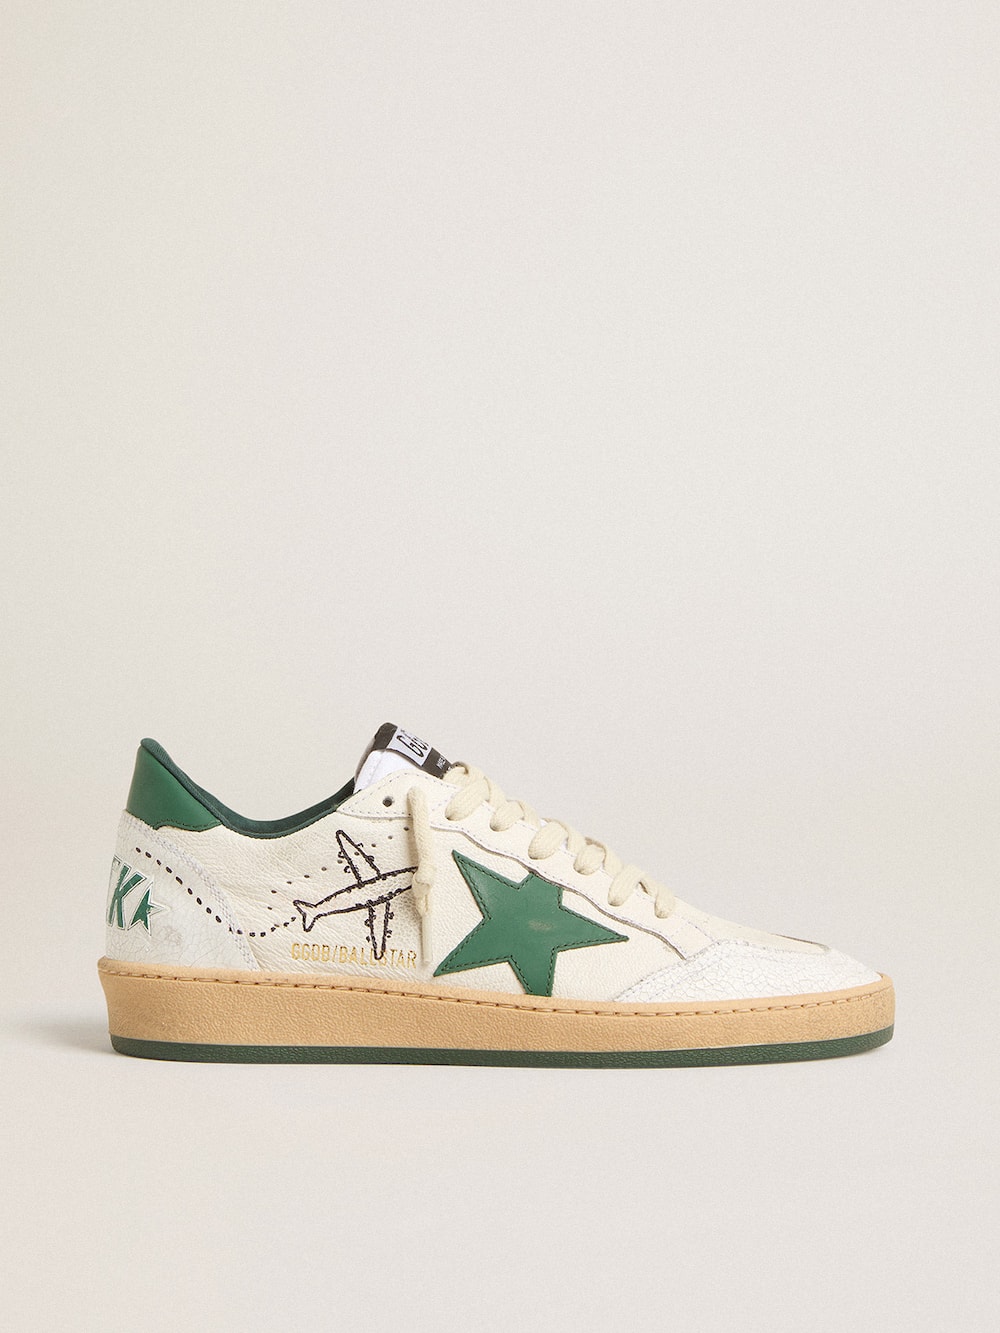 Golden Goose - Men's Ball Star Wishes in white nappa leather with green leather star and heel tab in 